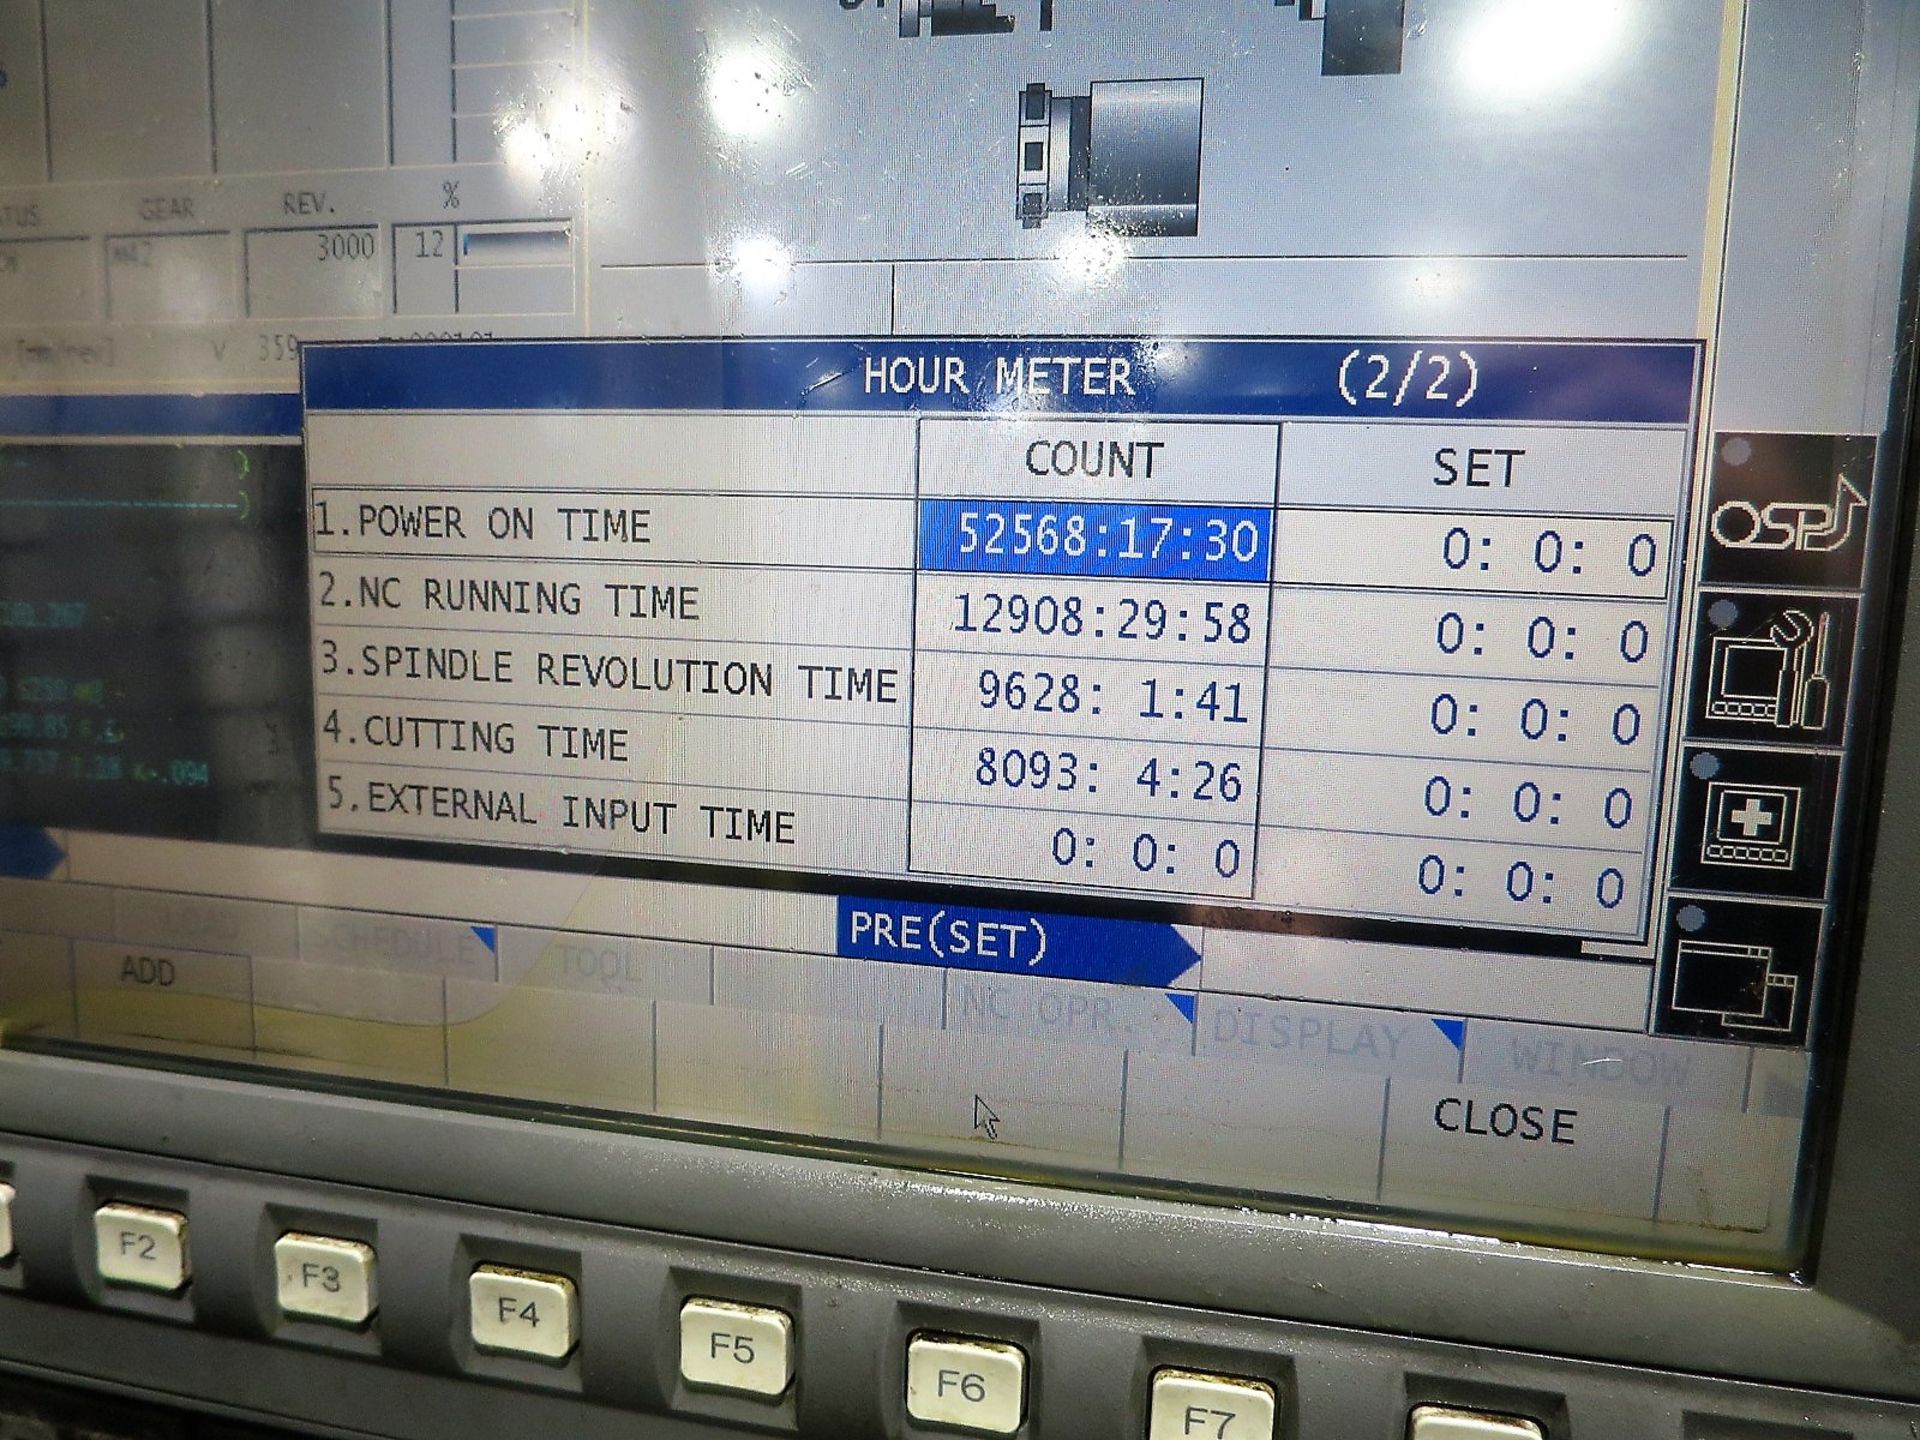 ***SOLD SOLD SOLD*** OKUMA LU-3000 EX 2SC-600 4-AXIS TWIN TURRENT CNC LATHE, NEW 2015, S/N 184757 - Image 6 of 7